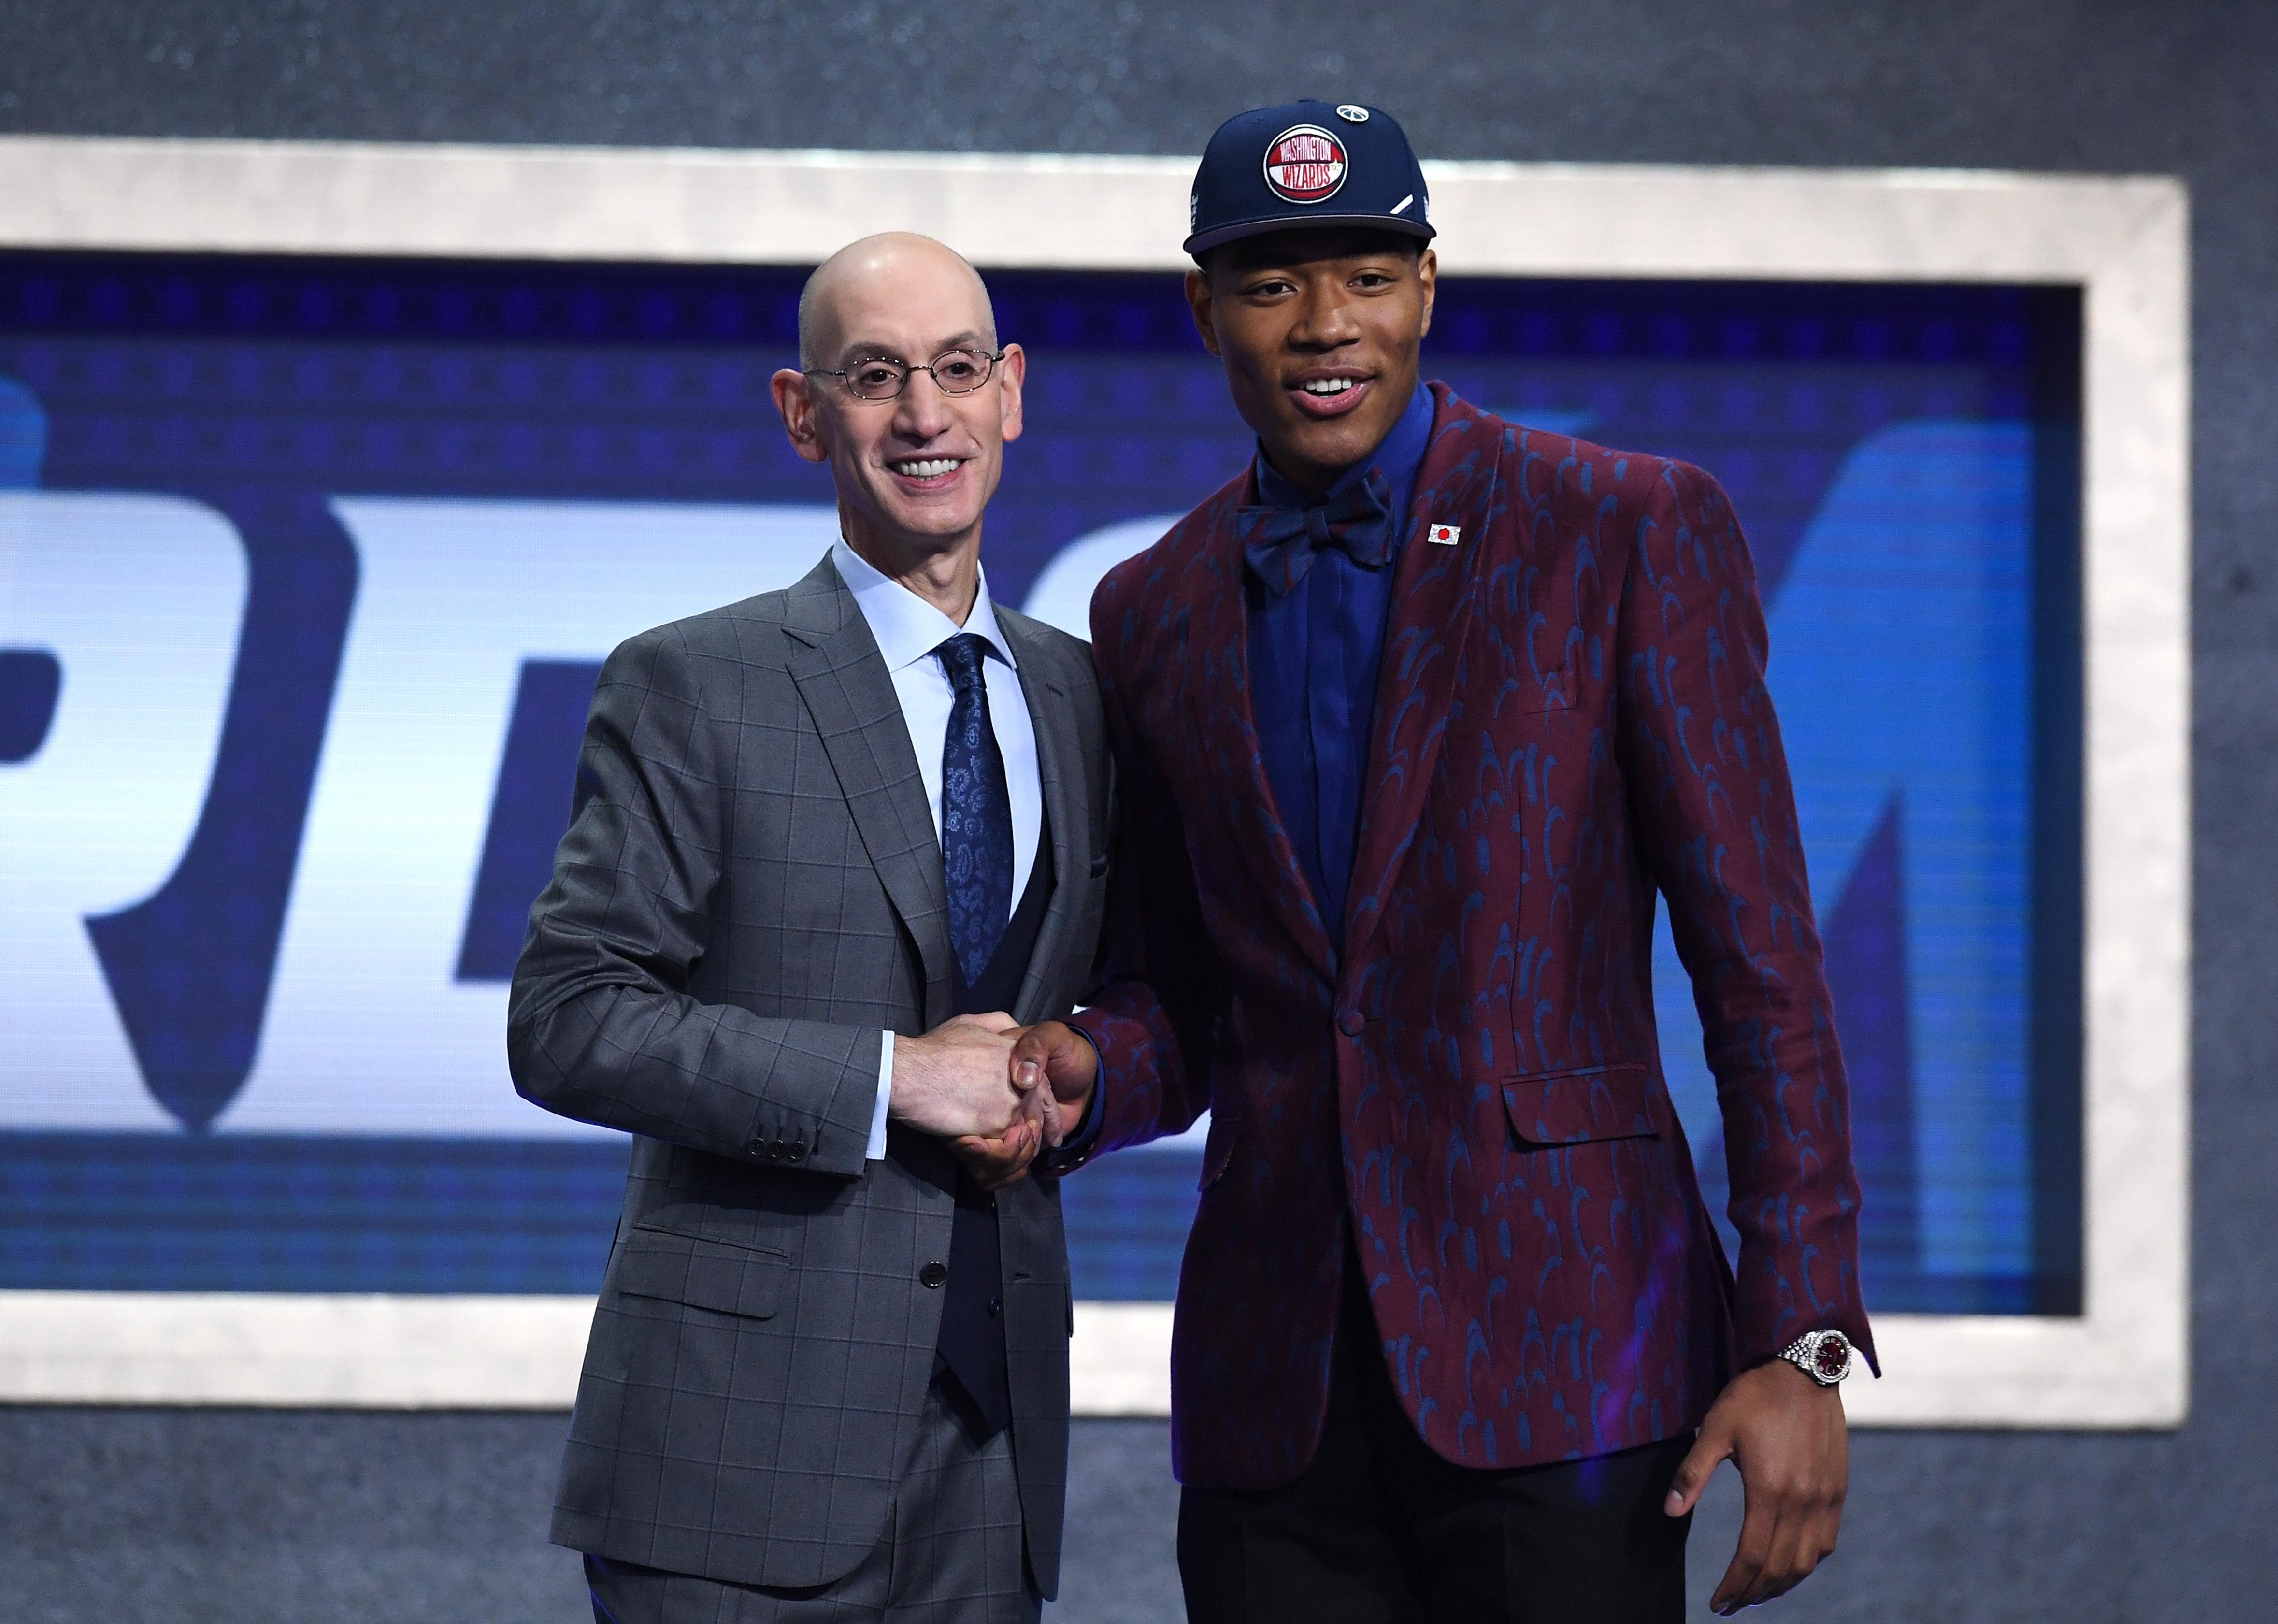 Rui Hachimura with NBA Commissioner Adam Silver after being drafted.